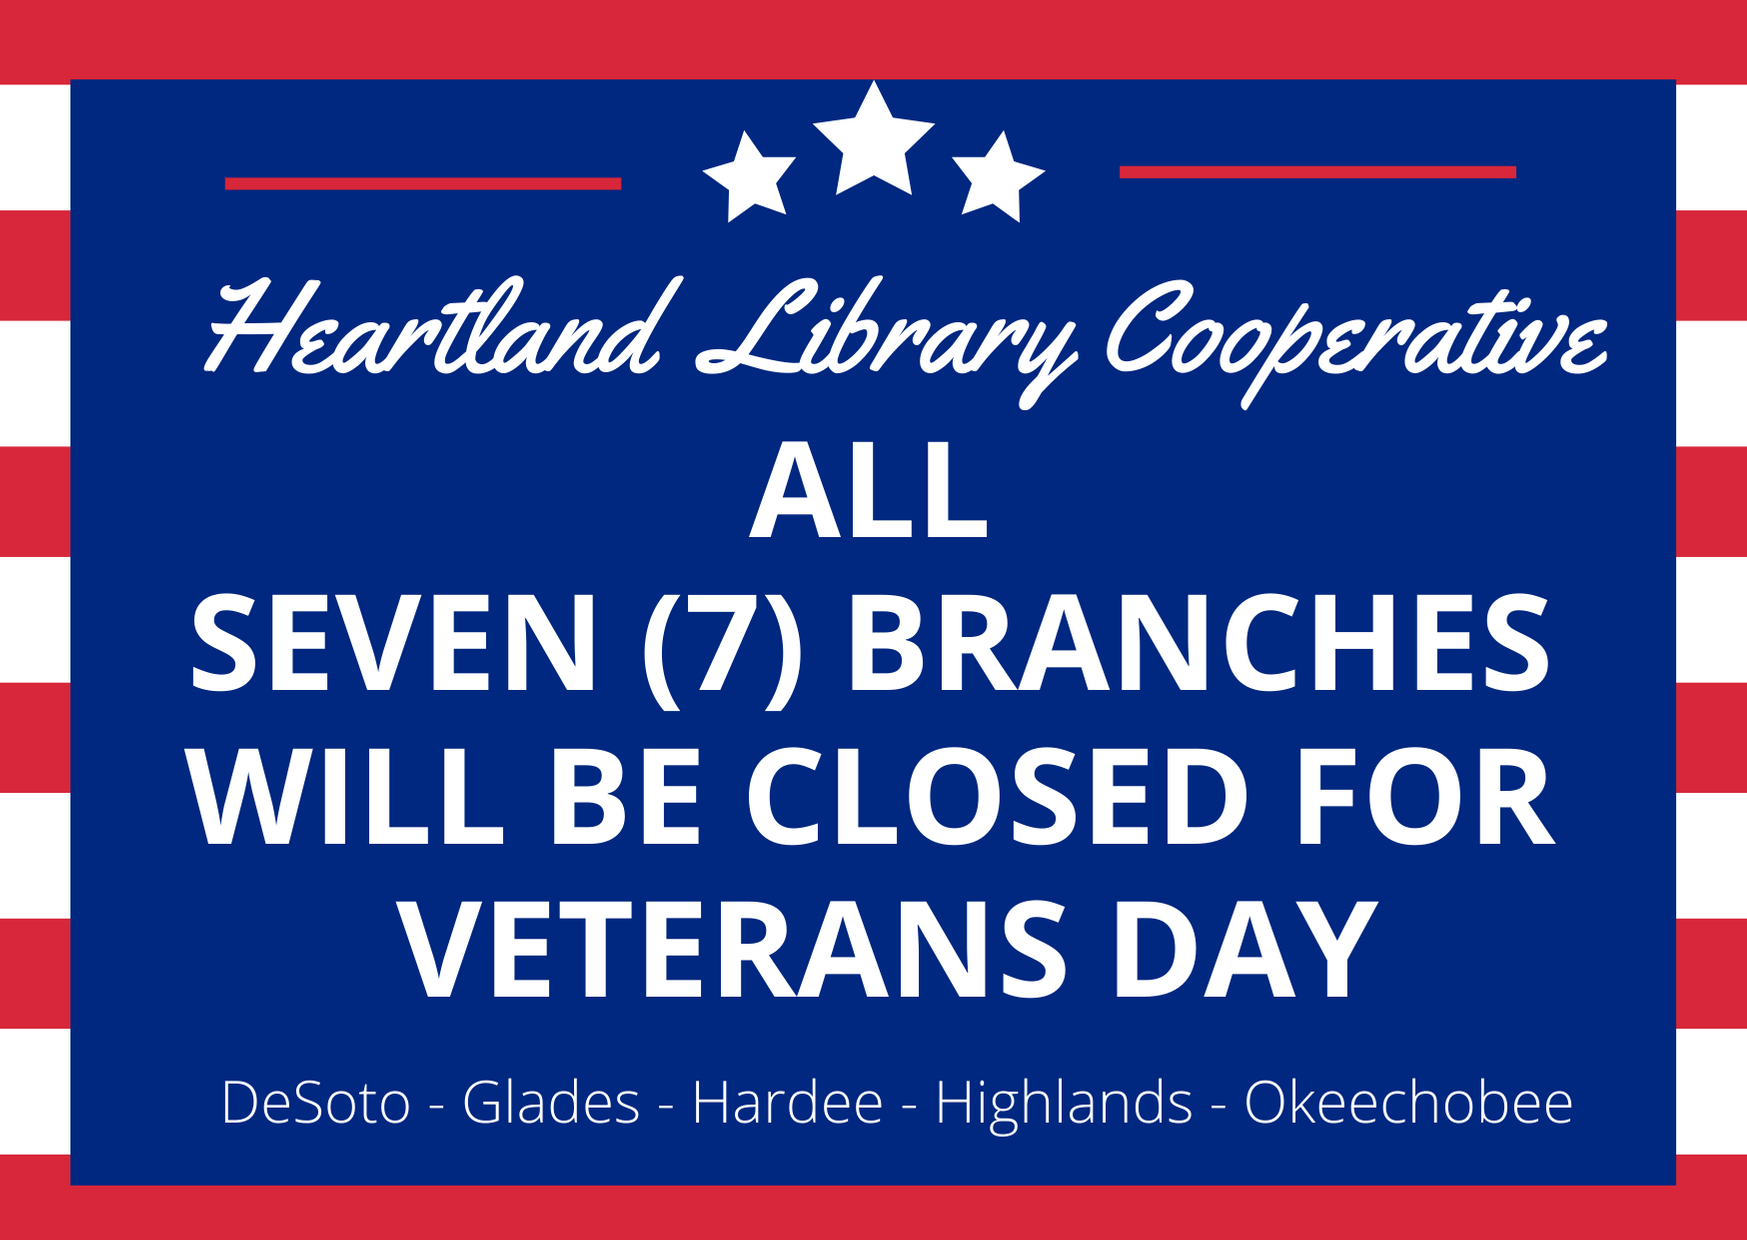 Heartland Library Cooperative Libraries: CLOSED for Veterans Day